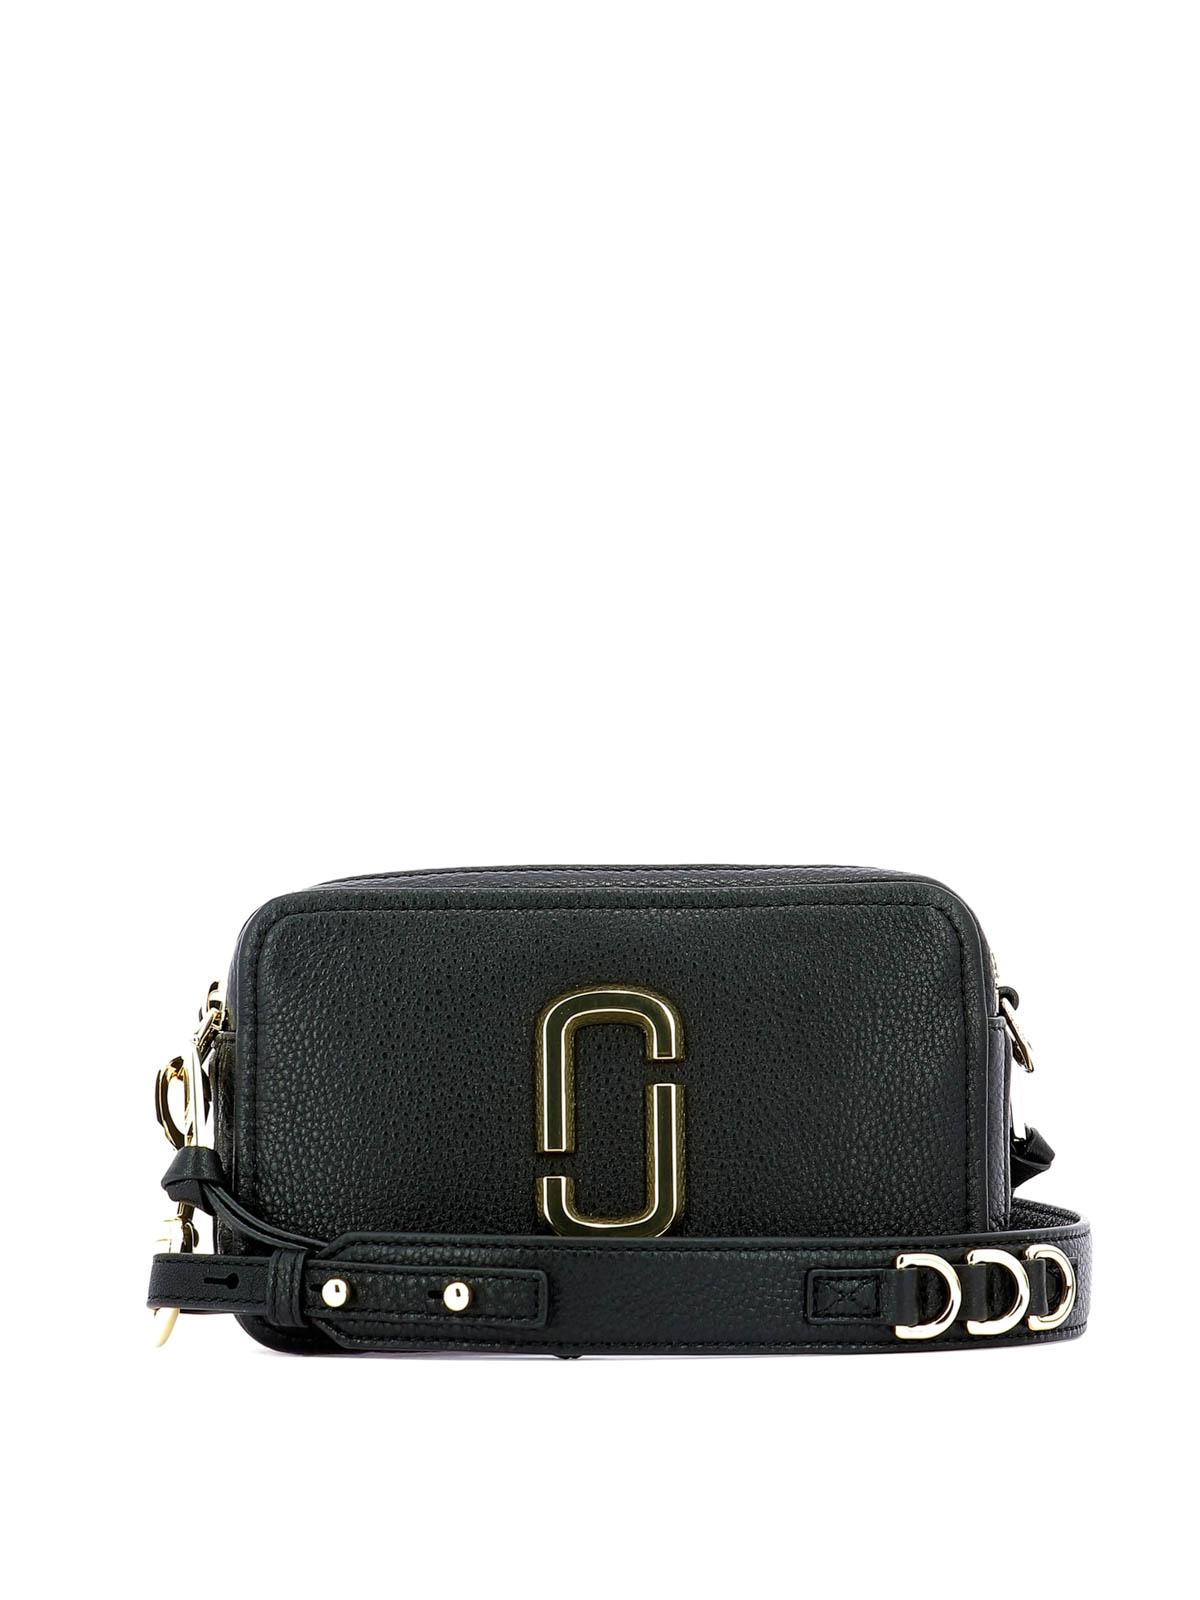 Marc Jacobs Leather The Softshot 21 Black Cross Body Bag - Lyst